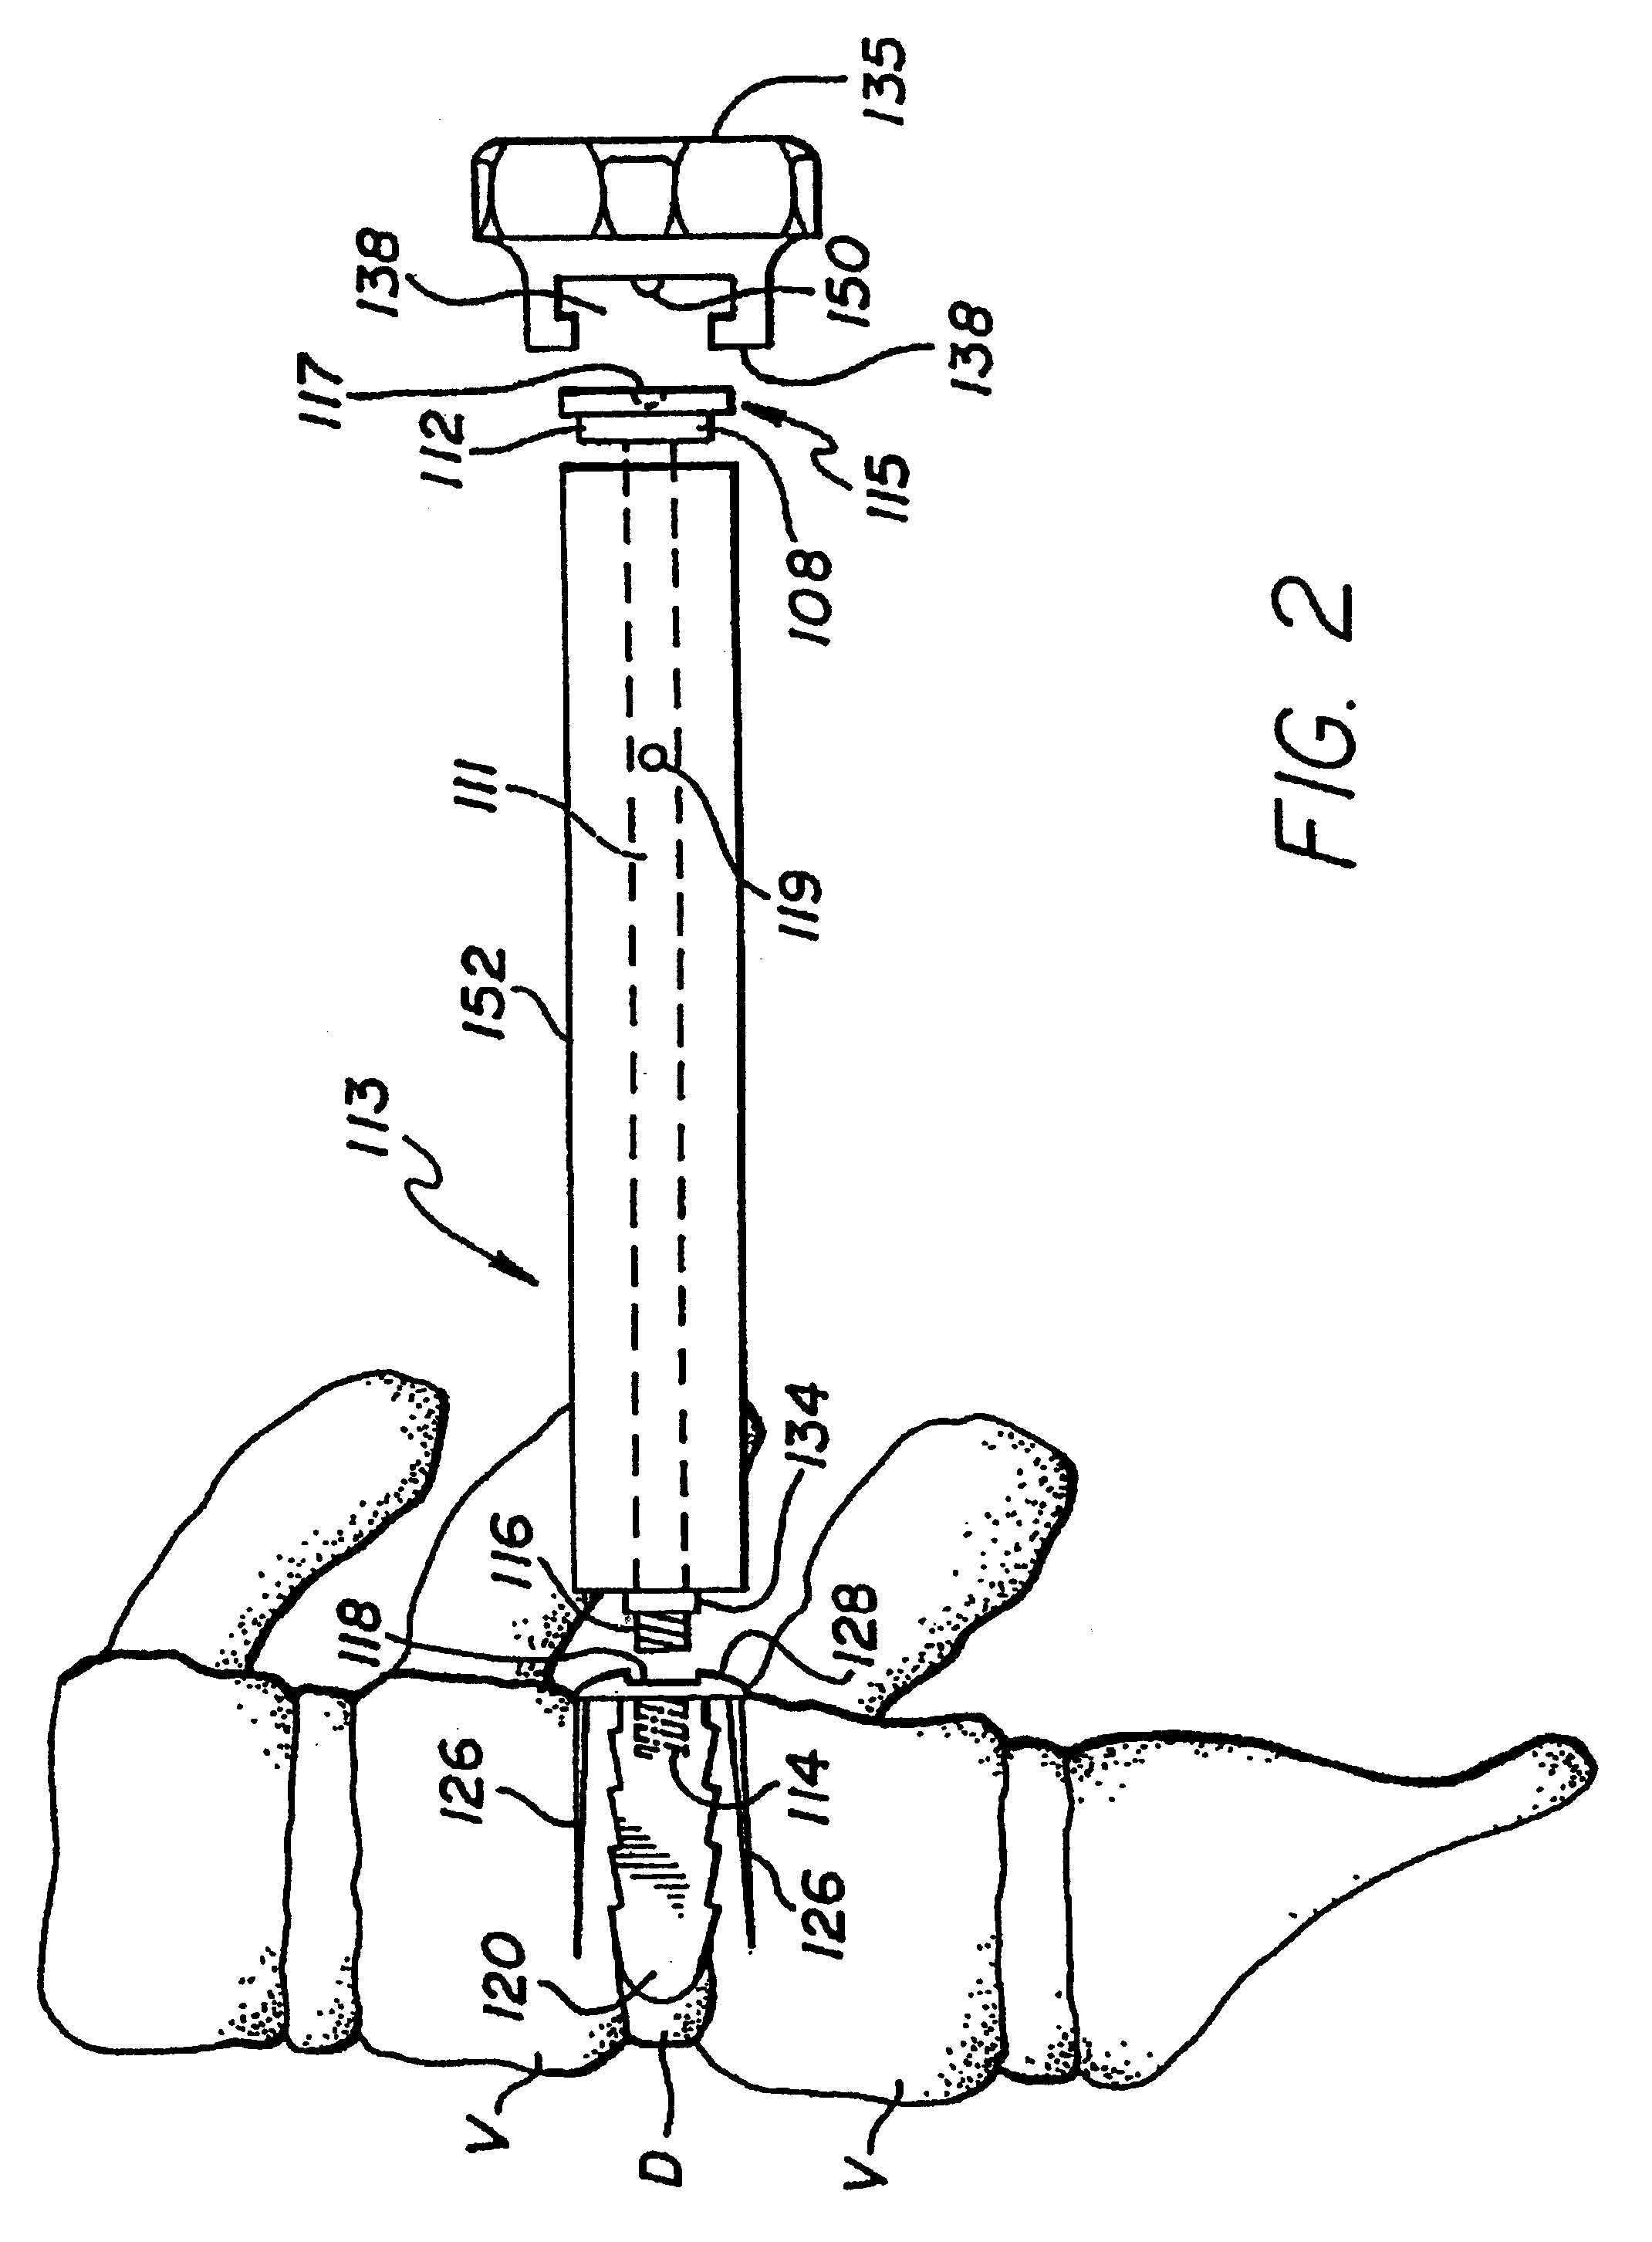 Method for inserting spinal implants and for securing a guard to the spine